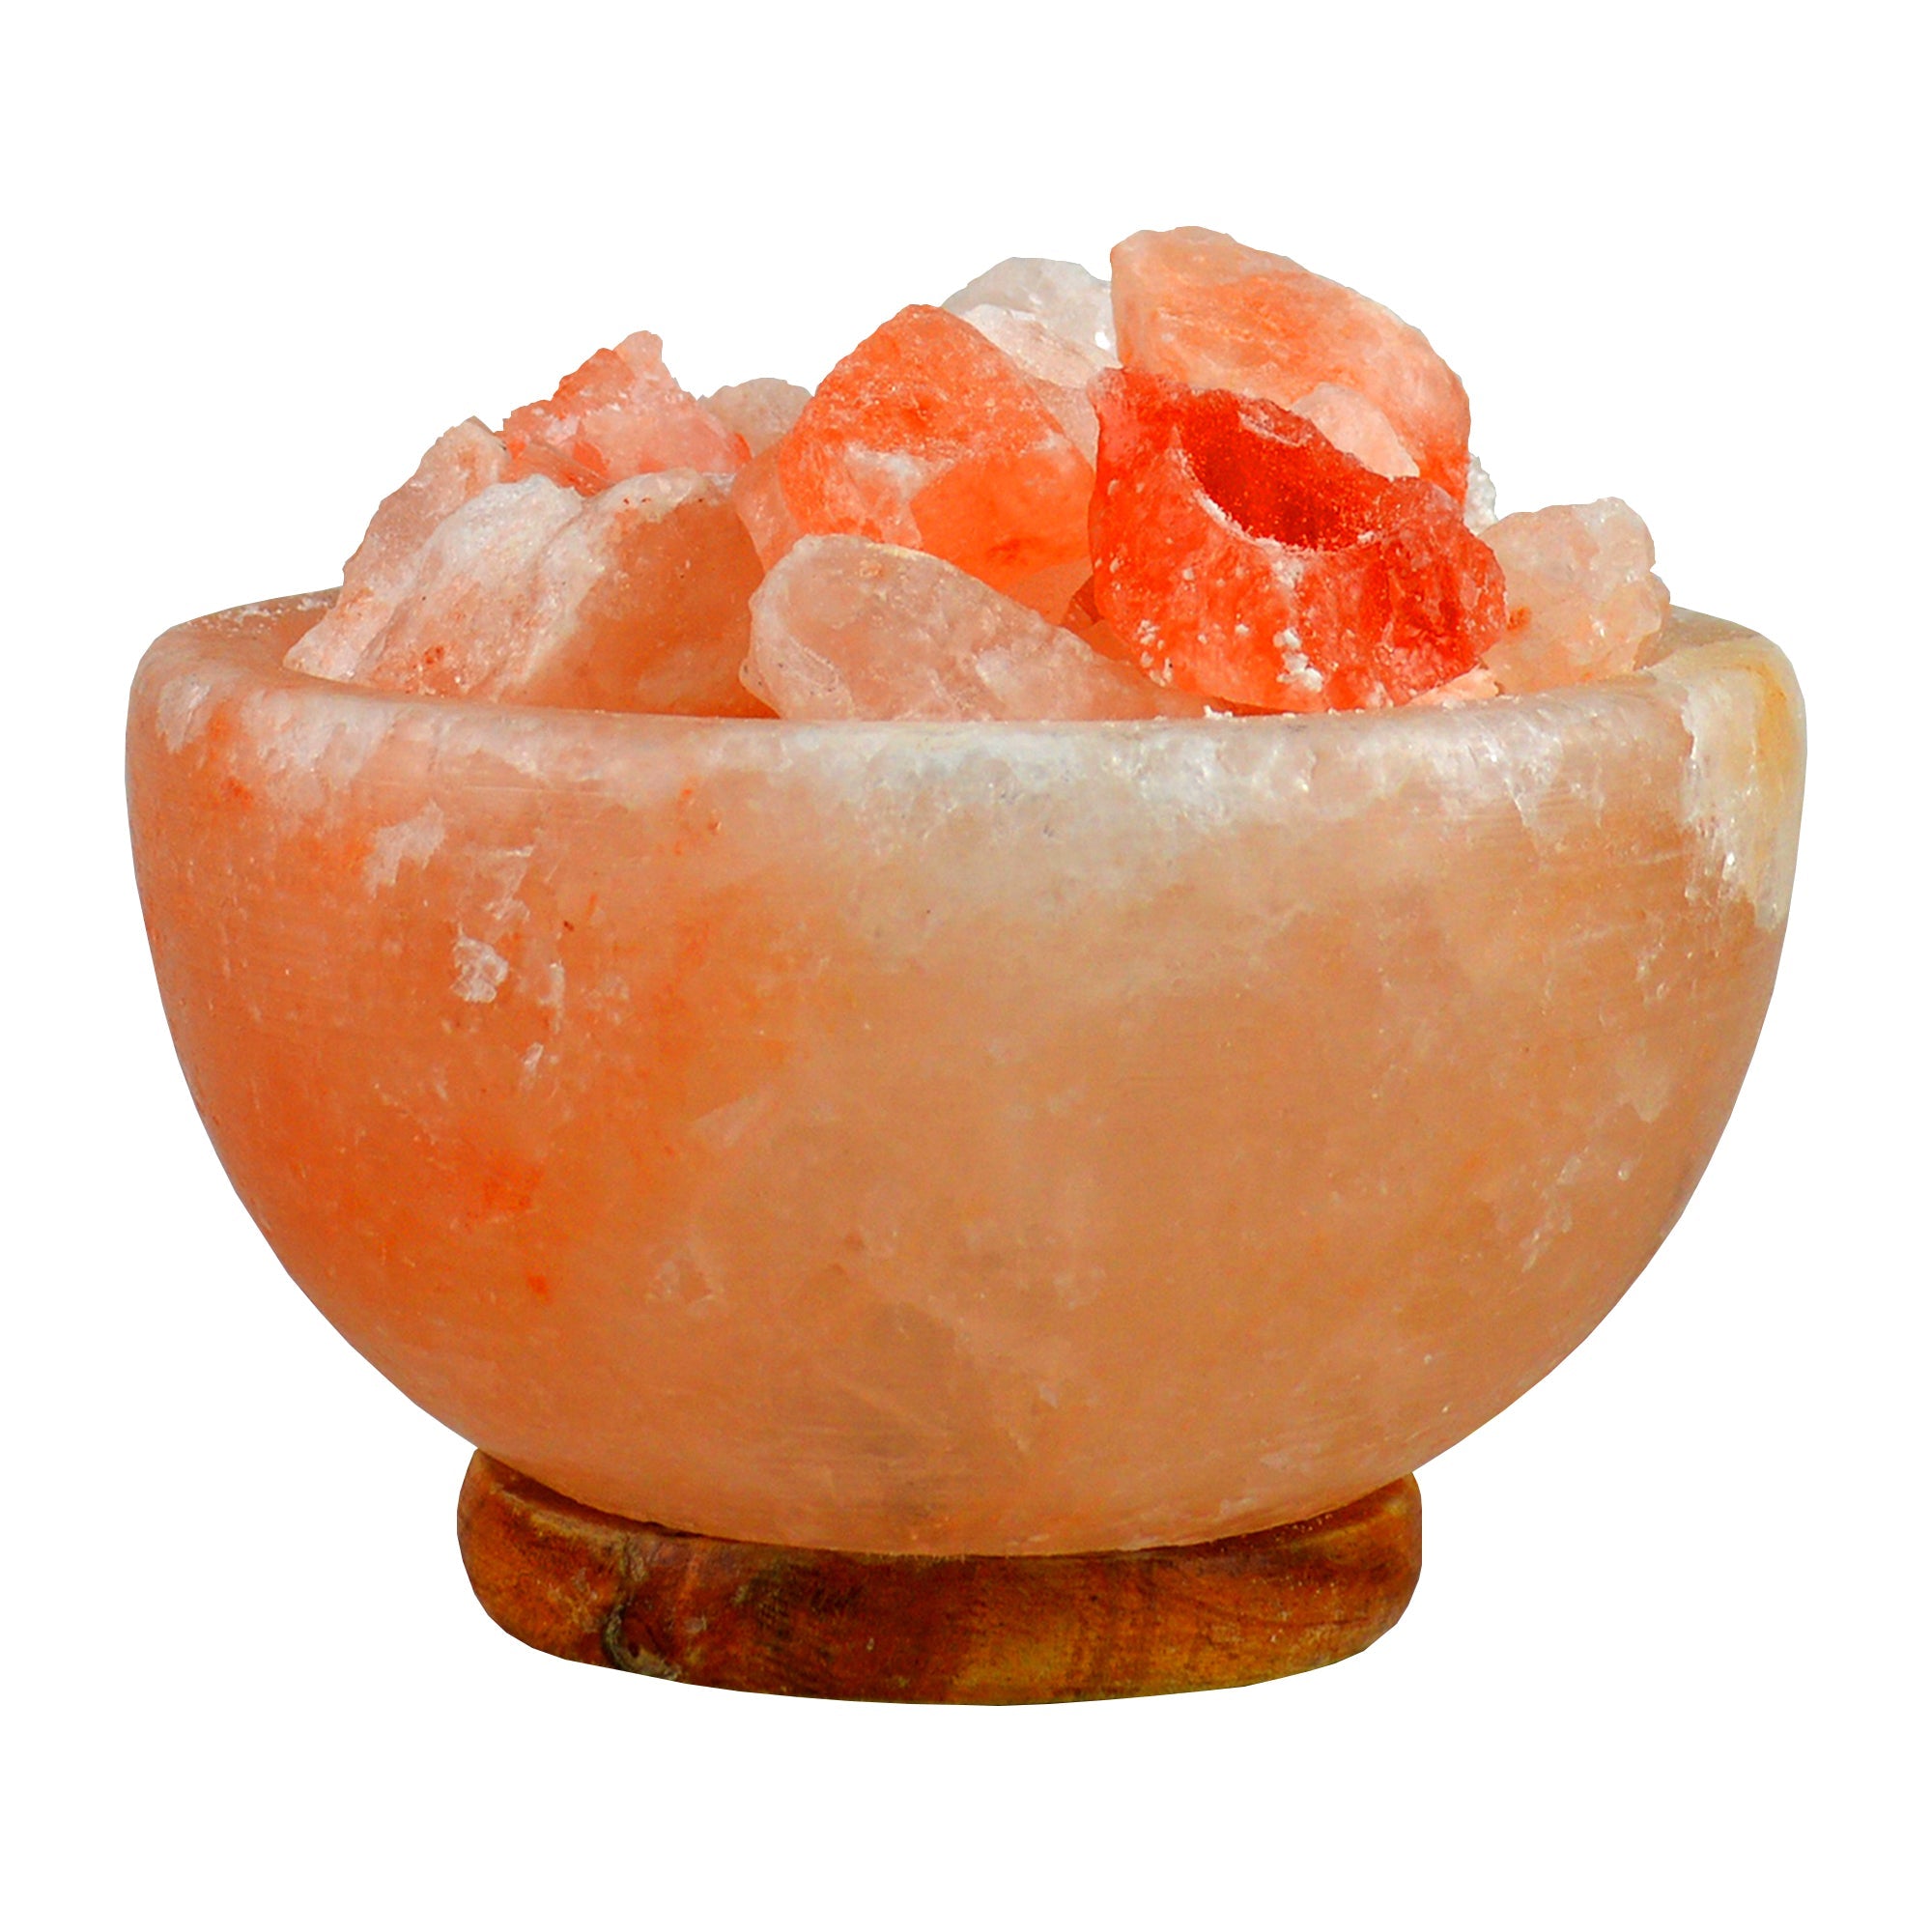 This beautiful fire bowl salt lamp takes the look of a fire pit of Himalayan salt, creating a magnificent effect when lit.